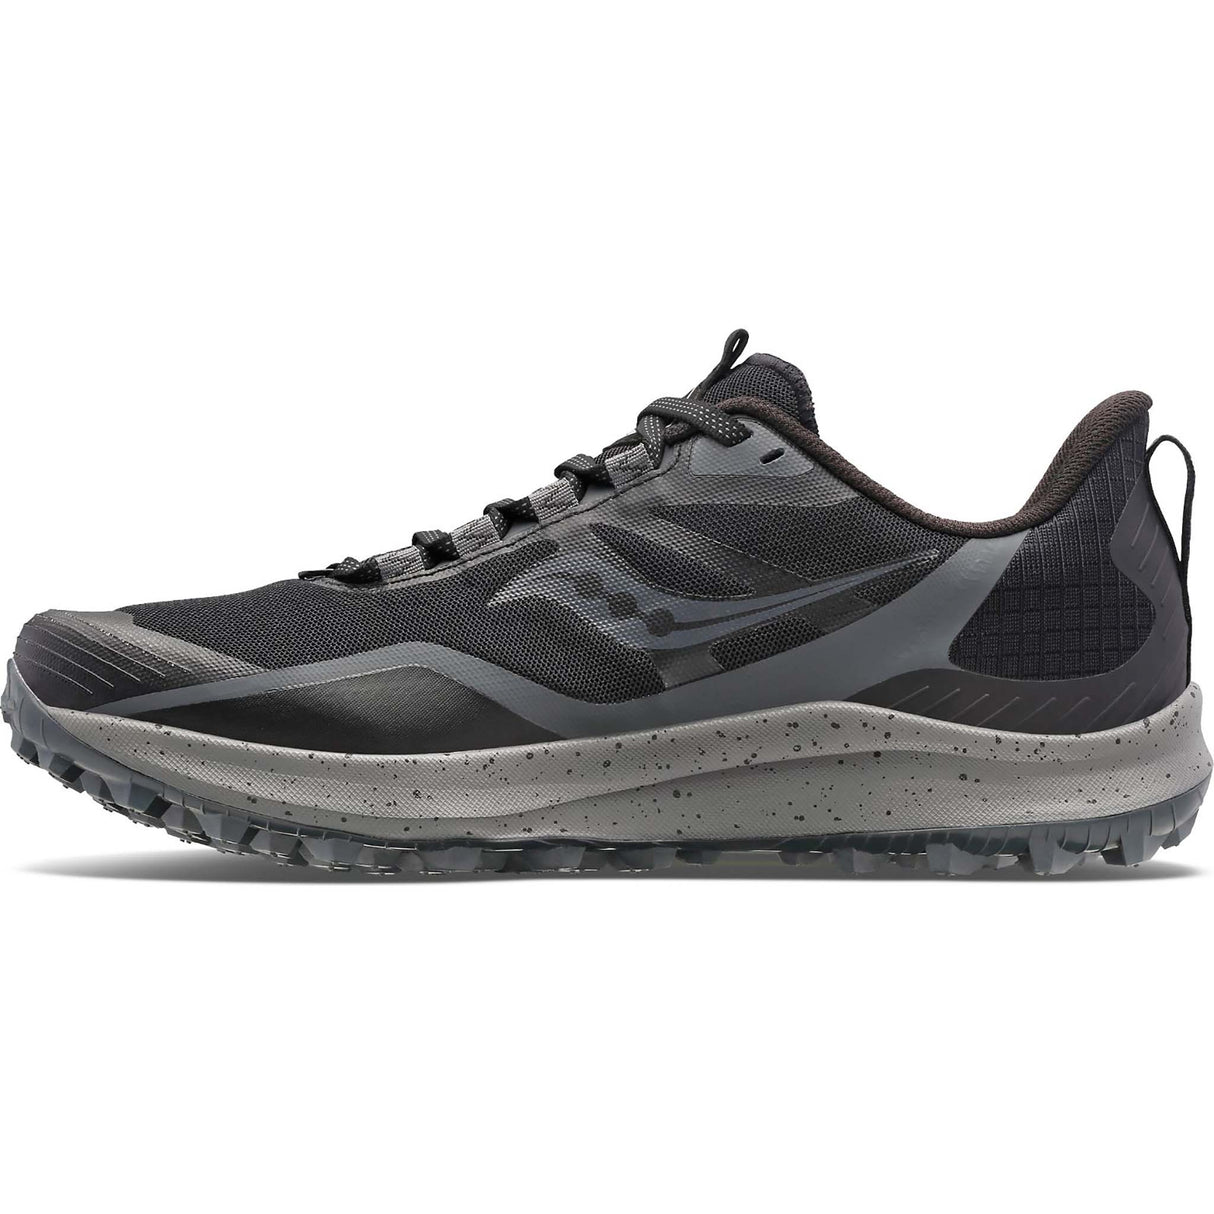 Saucony Peregrine 12 chaussures de course a pied trail femme - black charcoal lateral